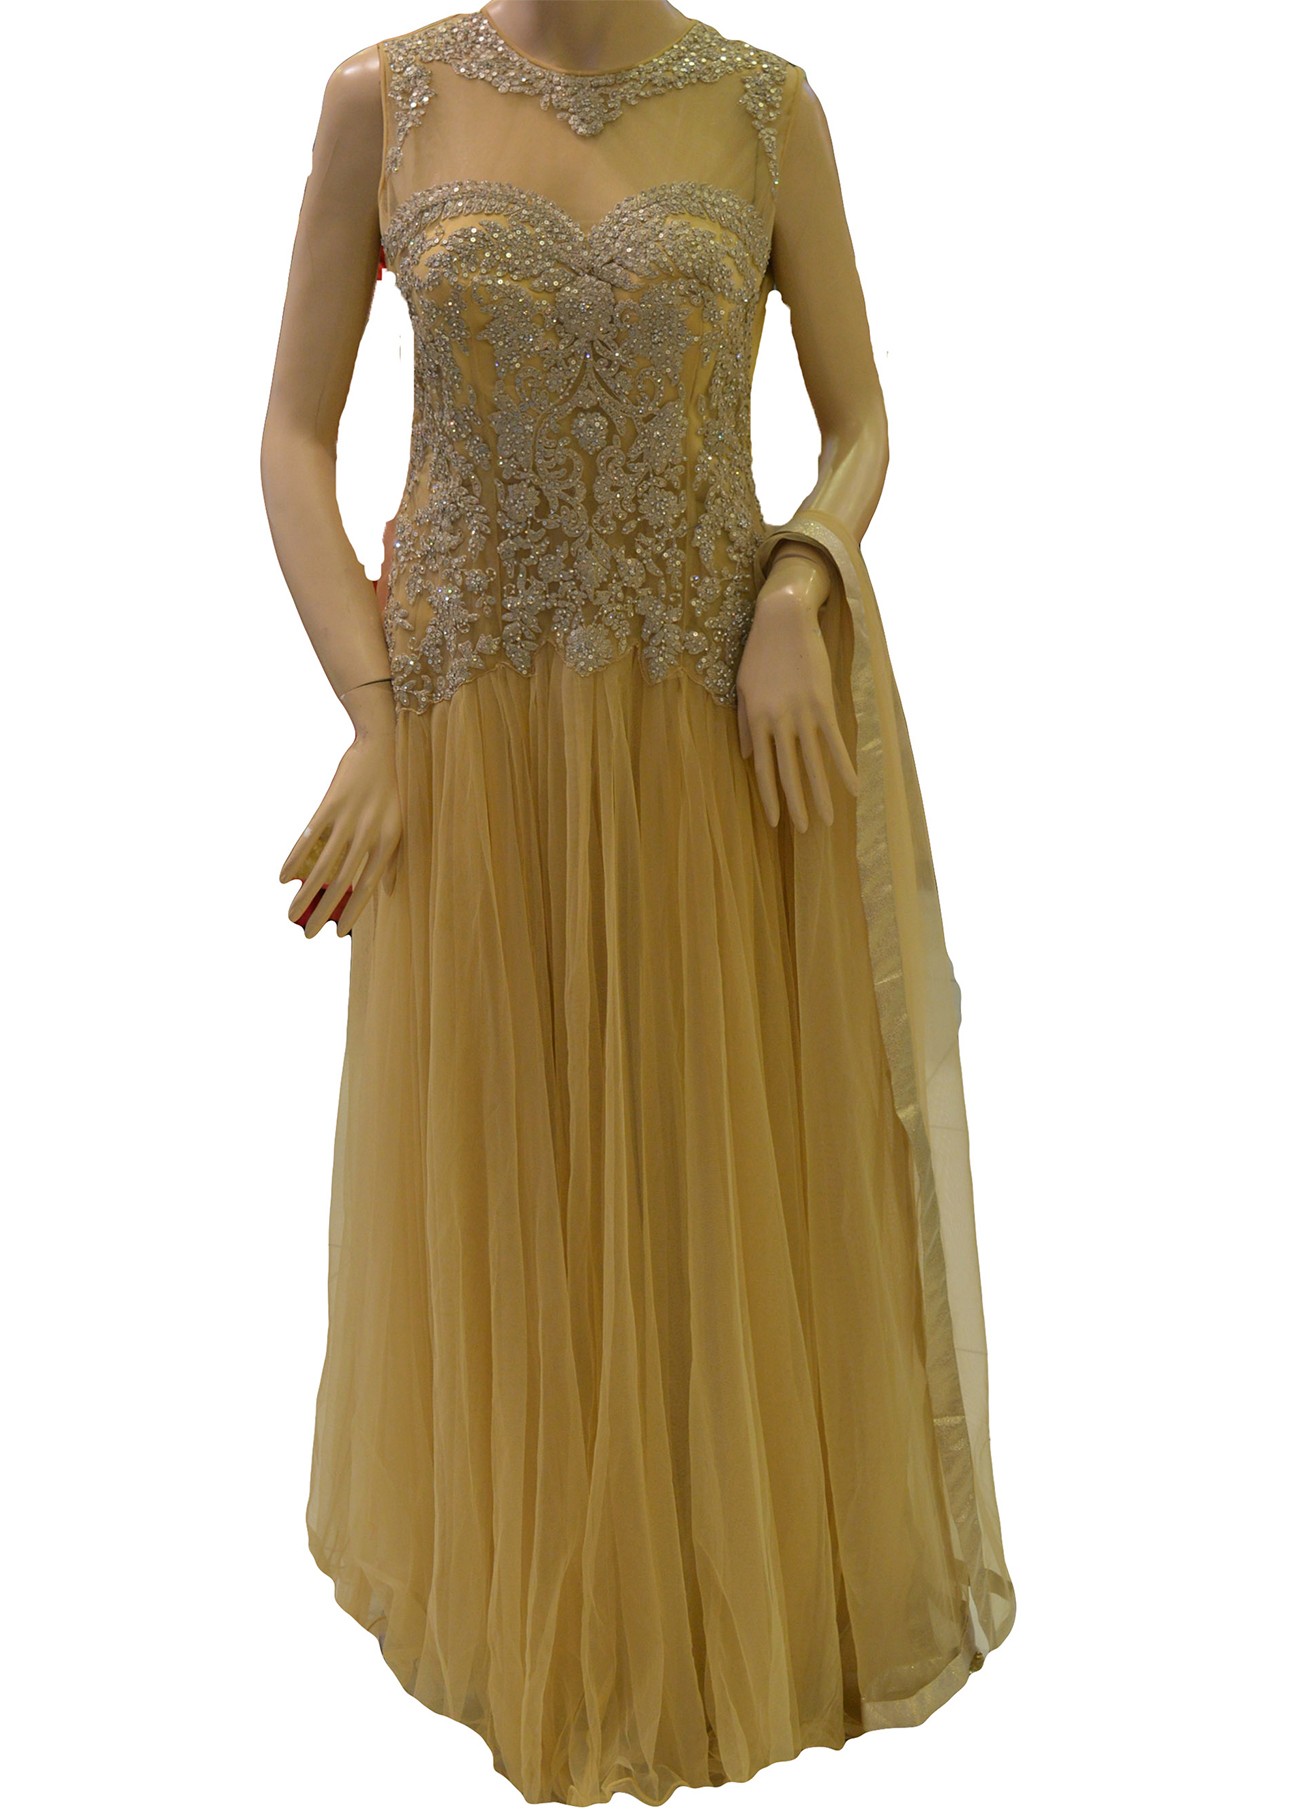 Buy Party Wear Gowns Online - House of Surya